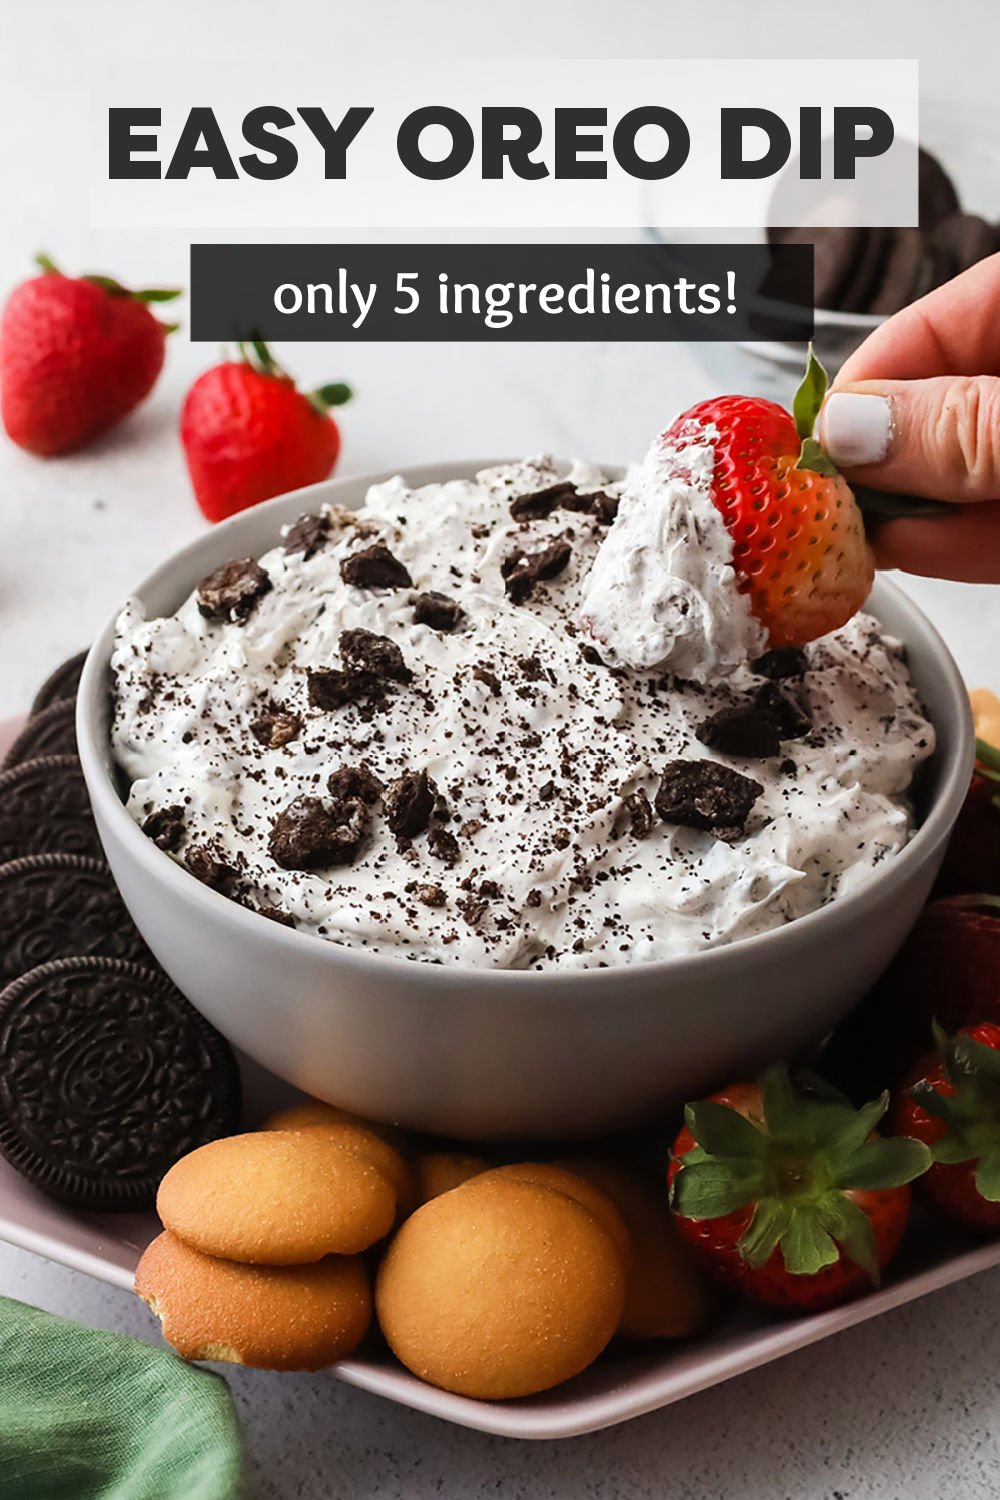 You only need five simple ingredients to make this easy Oreo dip! Loaded with cream cheese, whipped cream, and crushed Oreo cookies, this sweet dip is perfect for dipping strawberries, nilla wafers, and more. | www.persnicketyplates.com